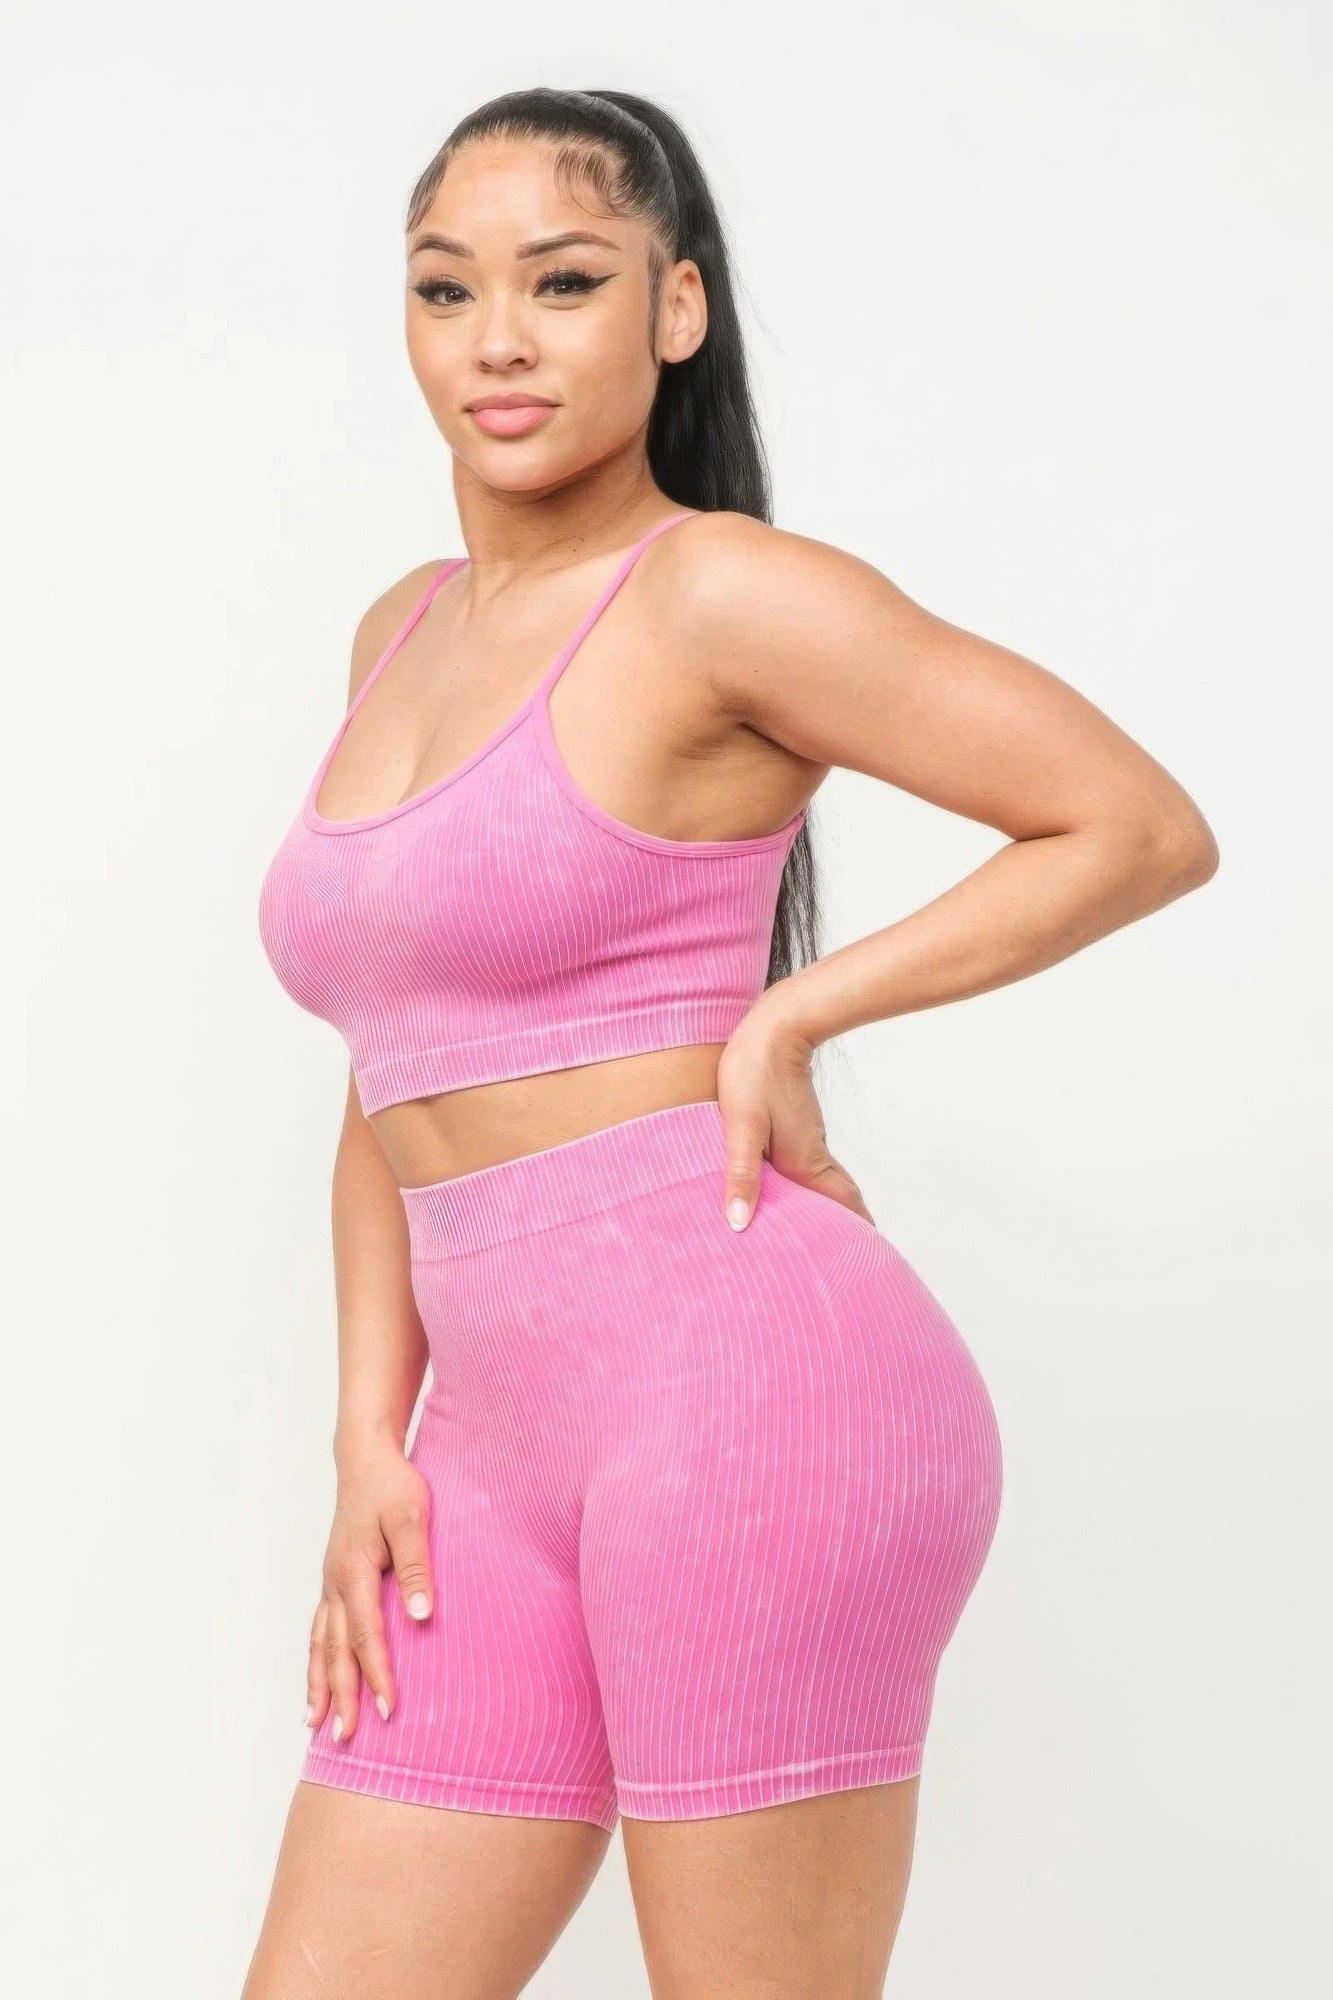 Washed Seamless Basic Tank Top And Shorts Set - Supreme Deals